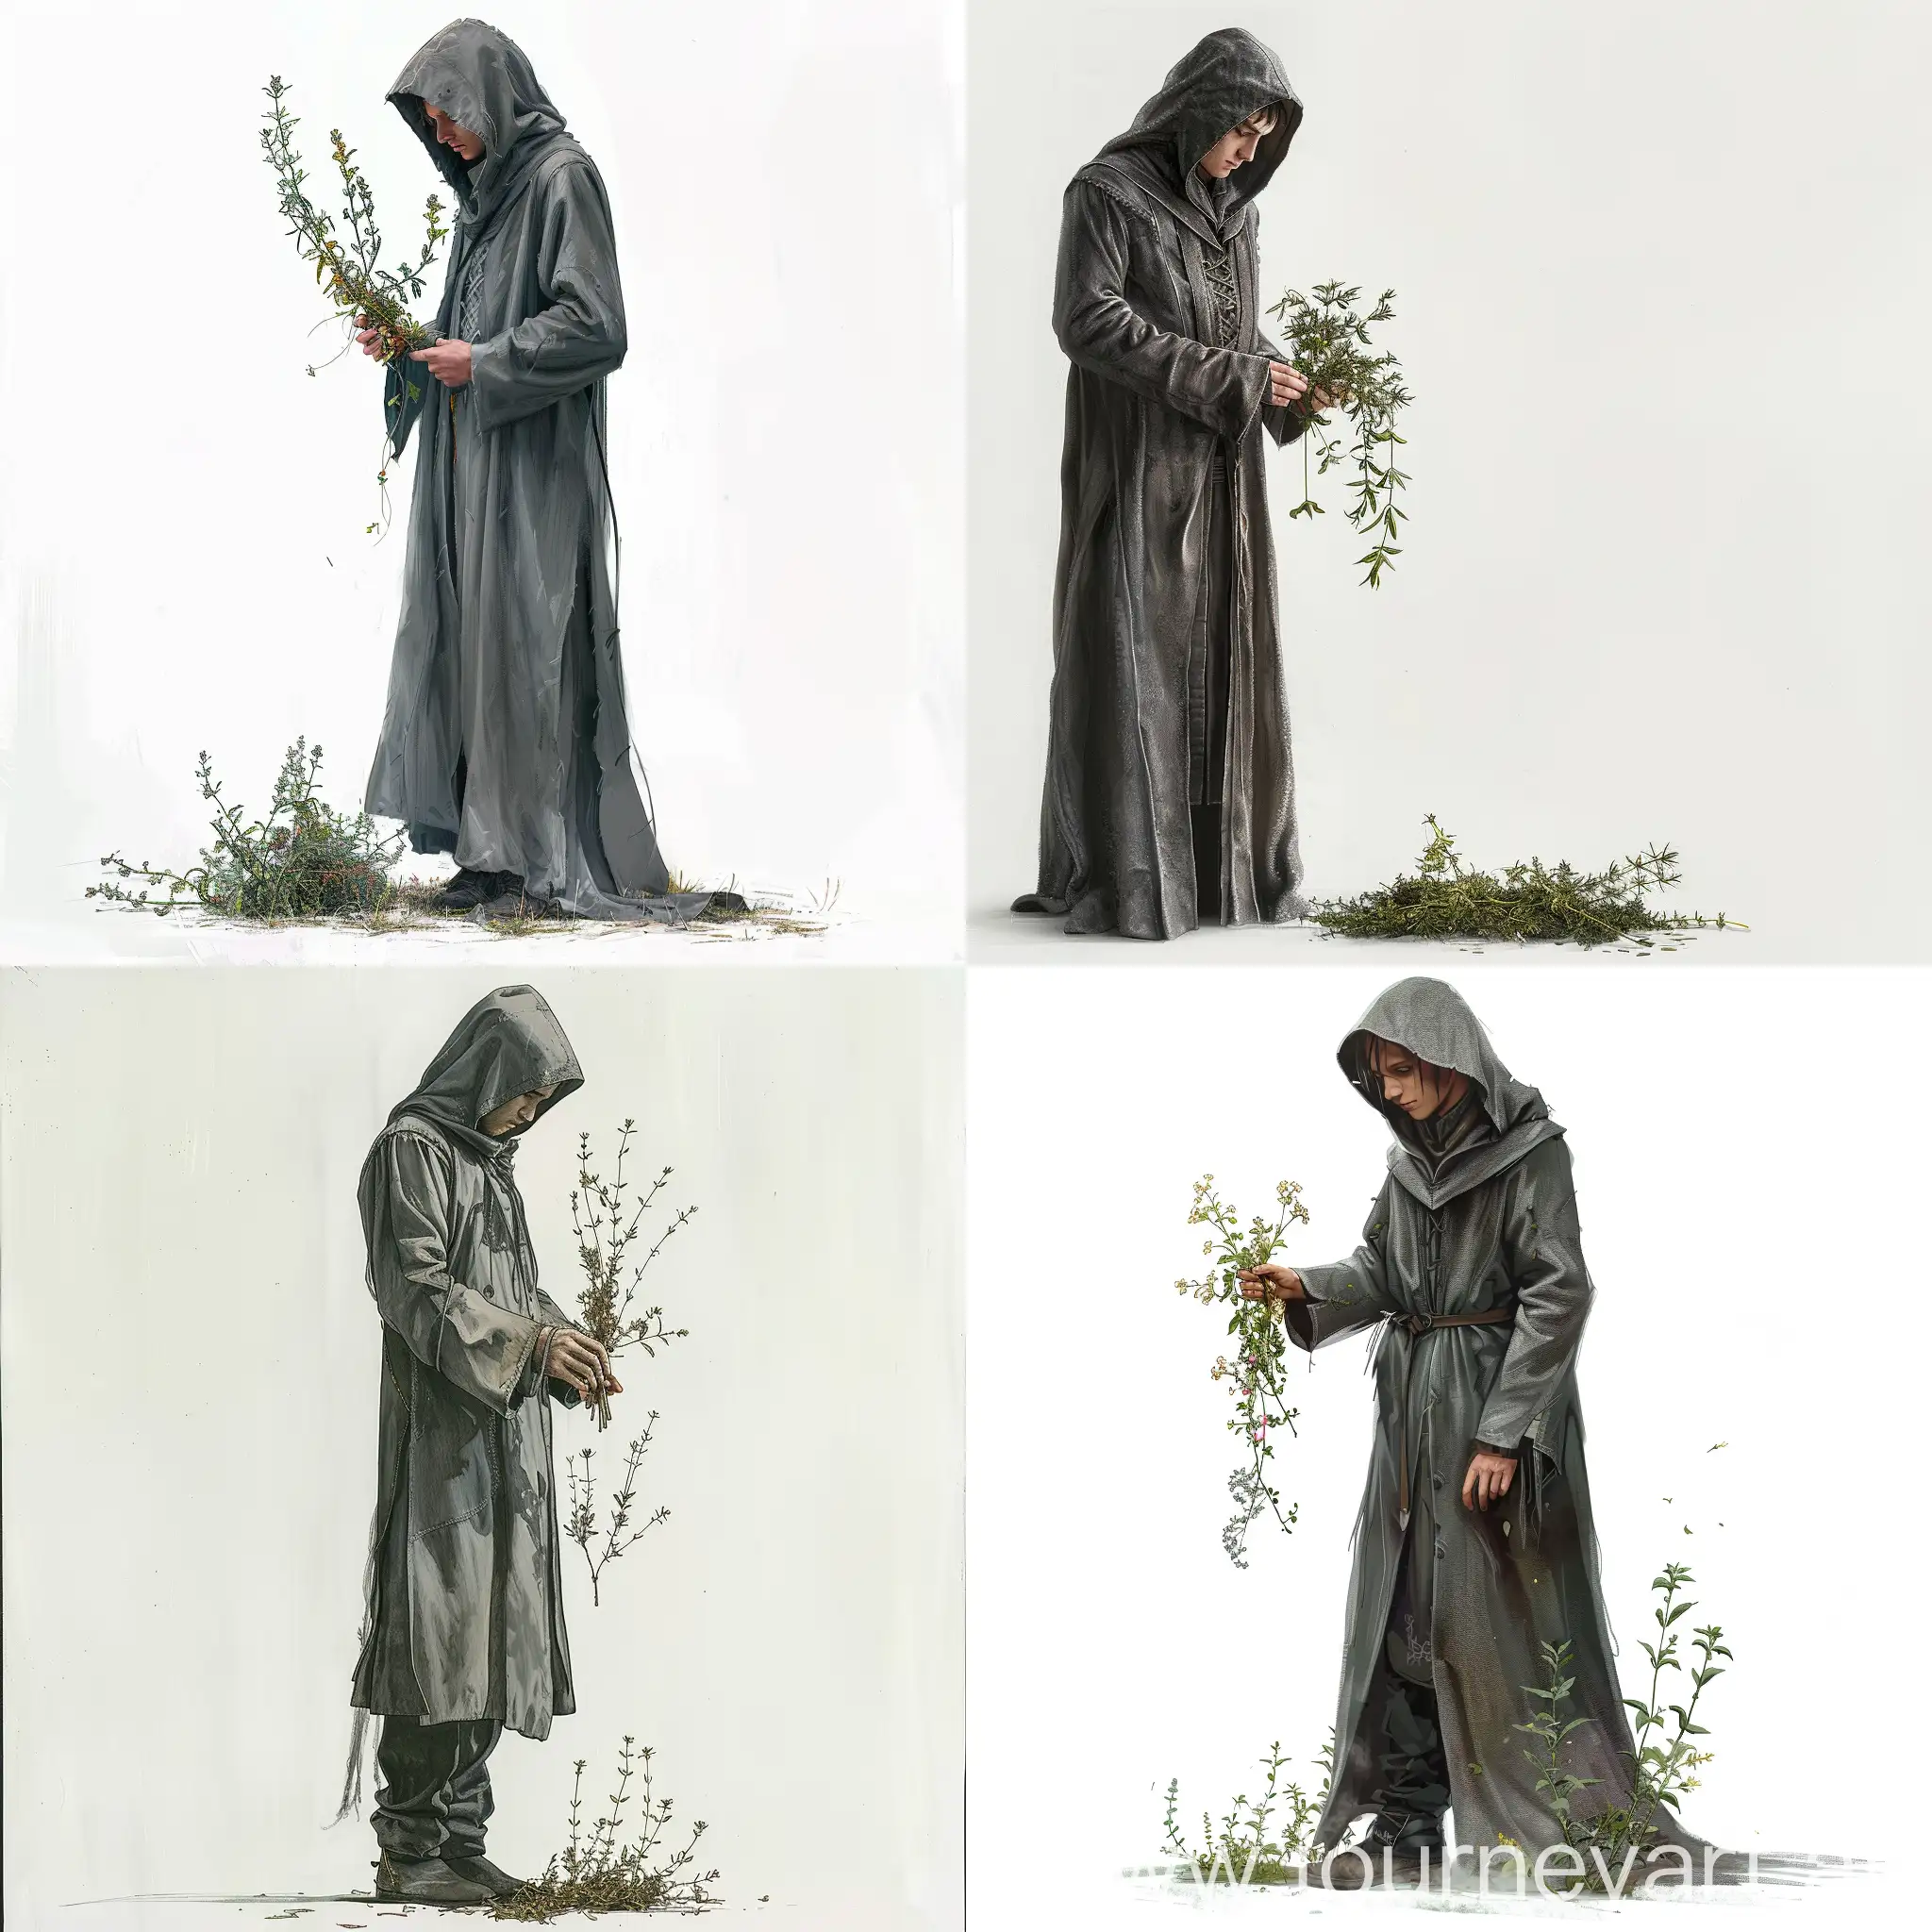 human wearing long grey coat, hooded, examinating herbs, white background, medieval style art, male, young, Standing tall